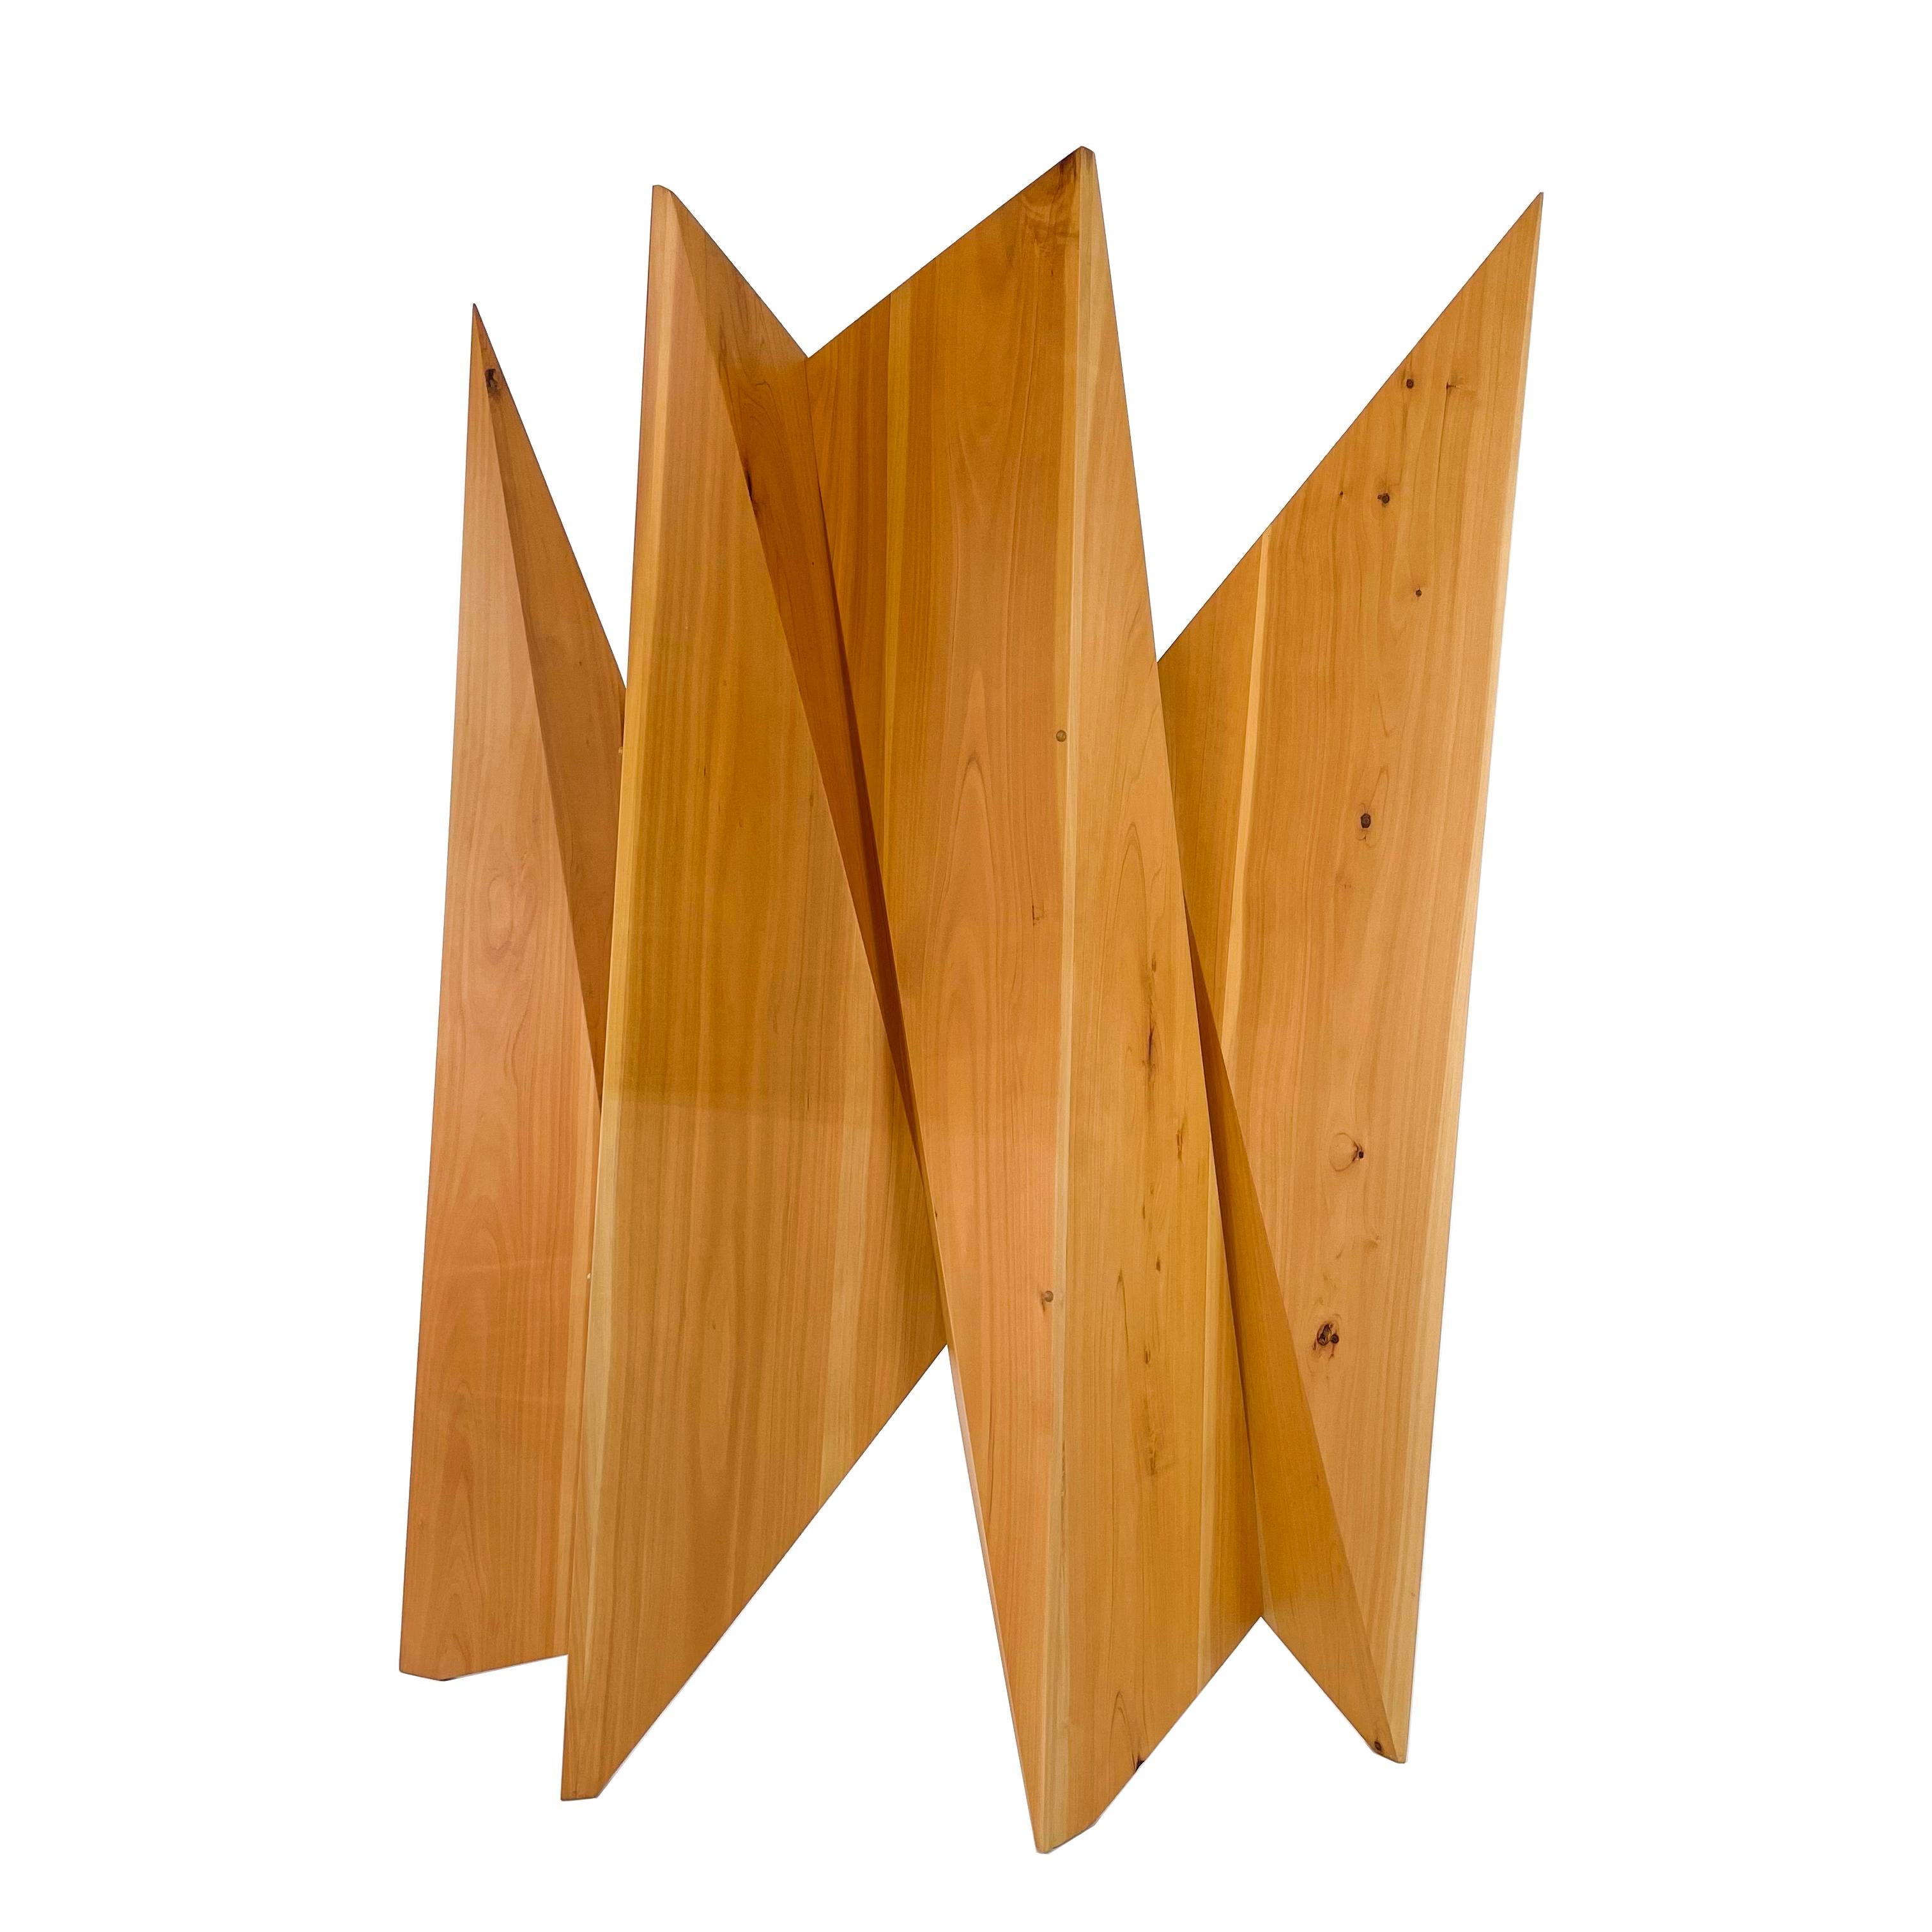 Central American Modern Wood Sculpture Wall Screen / Room Divider by Pierre Sarkis For Sale